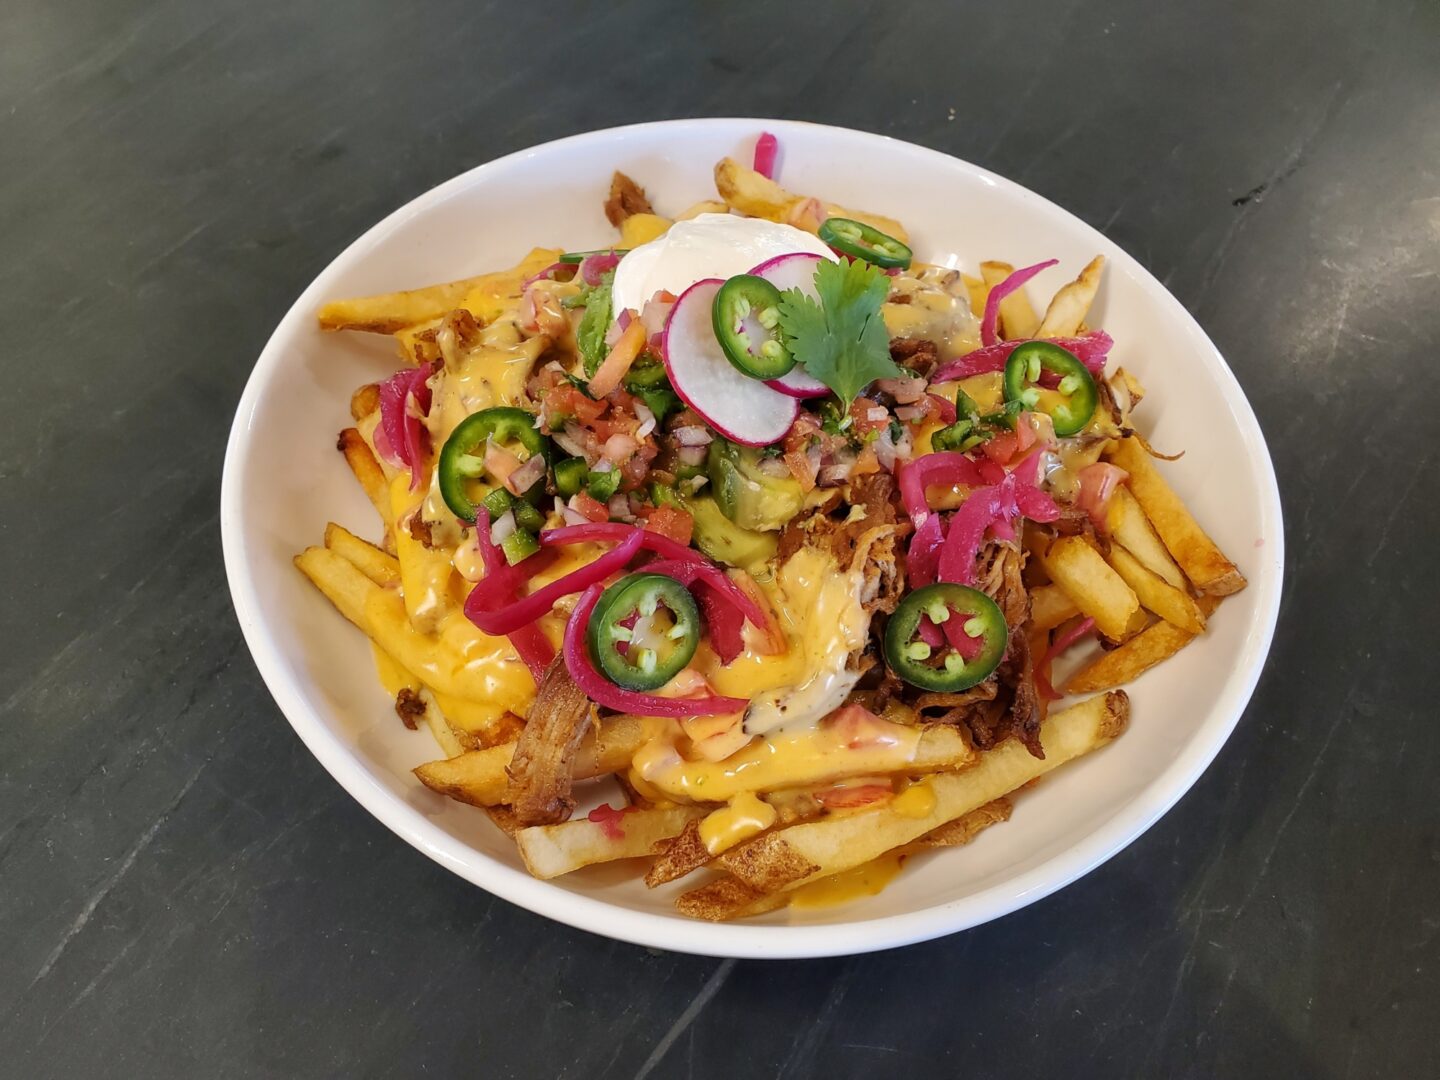 Pulled Pork French Fries at 42 bar and table in Little Rock, Arkansas